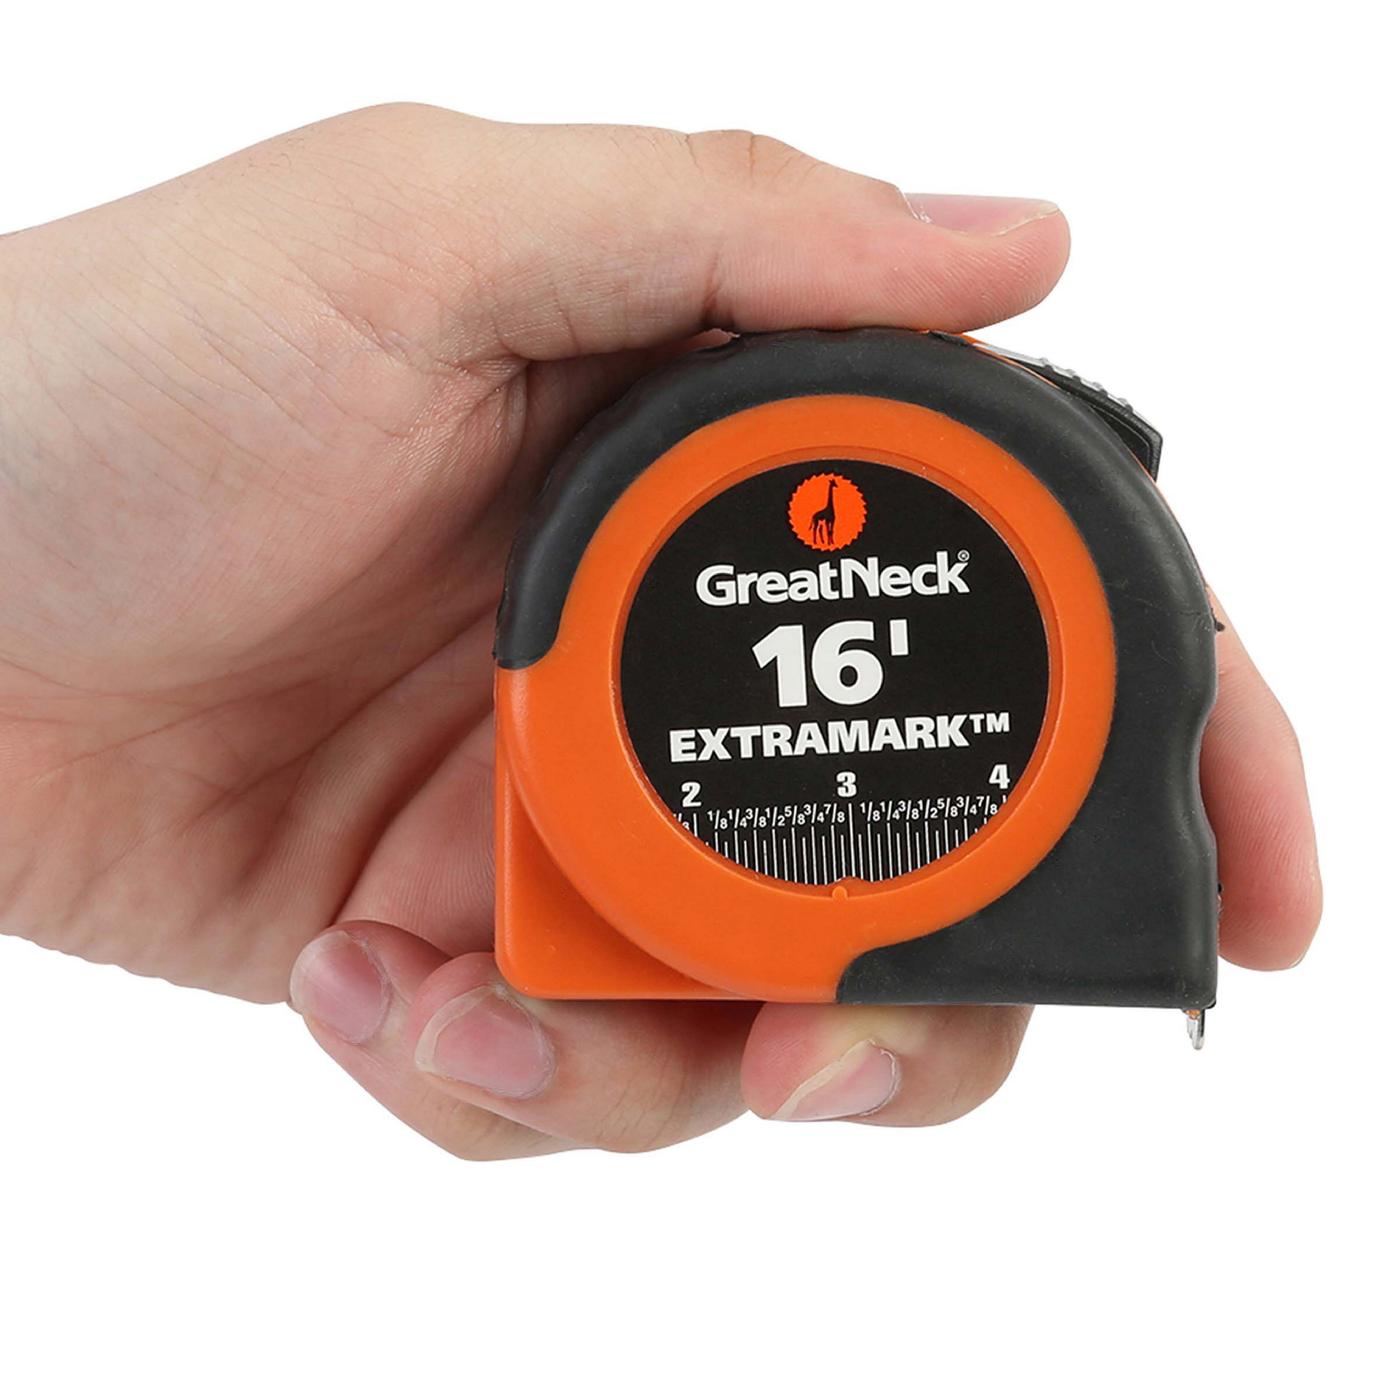 Great Neck ExtraMark™ Rubber Grip Tape Measure; image 6 of 9